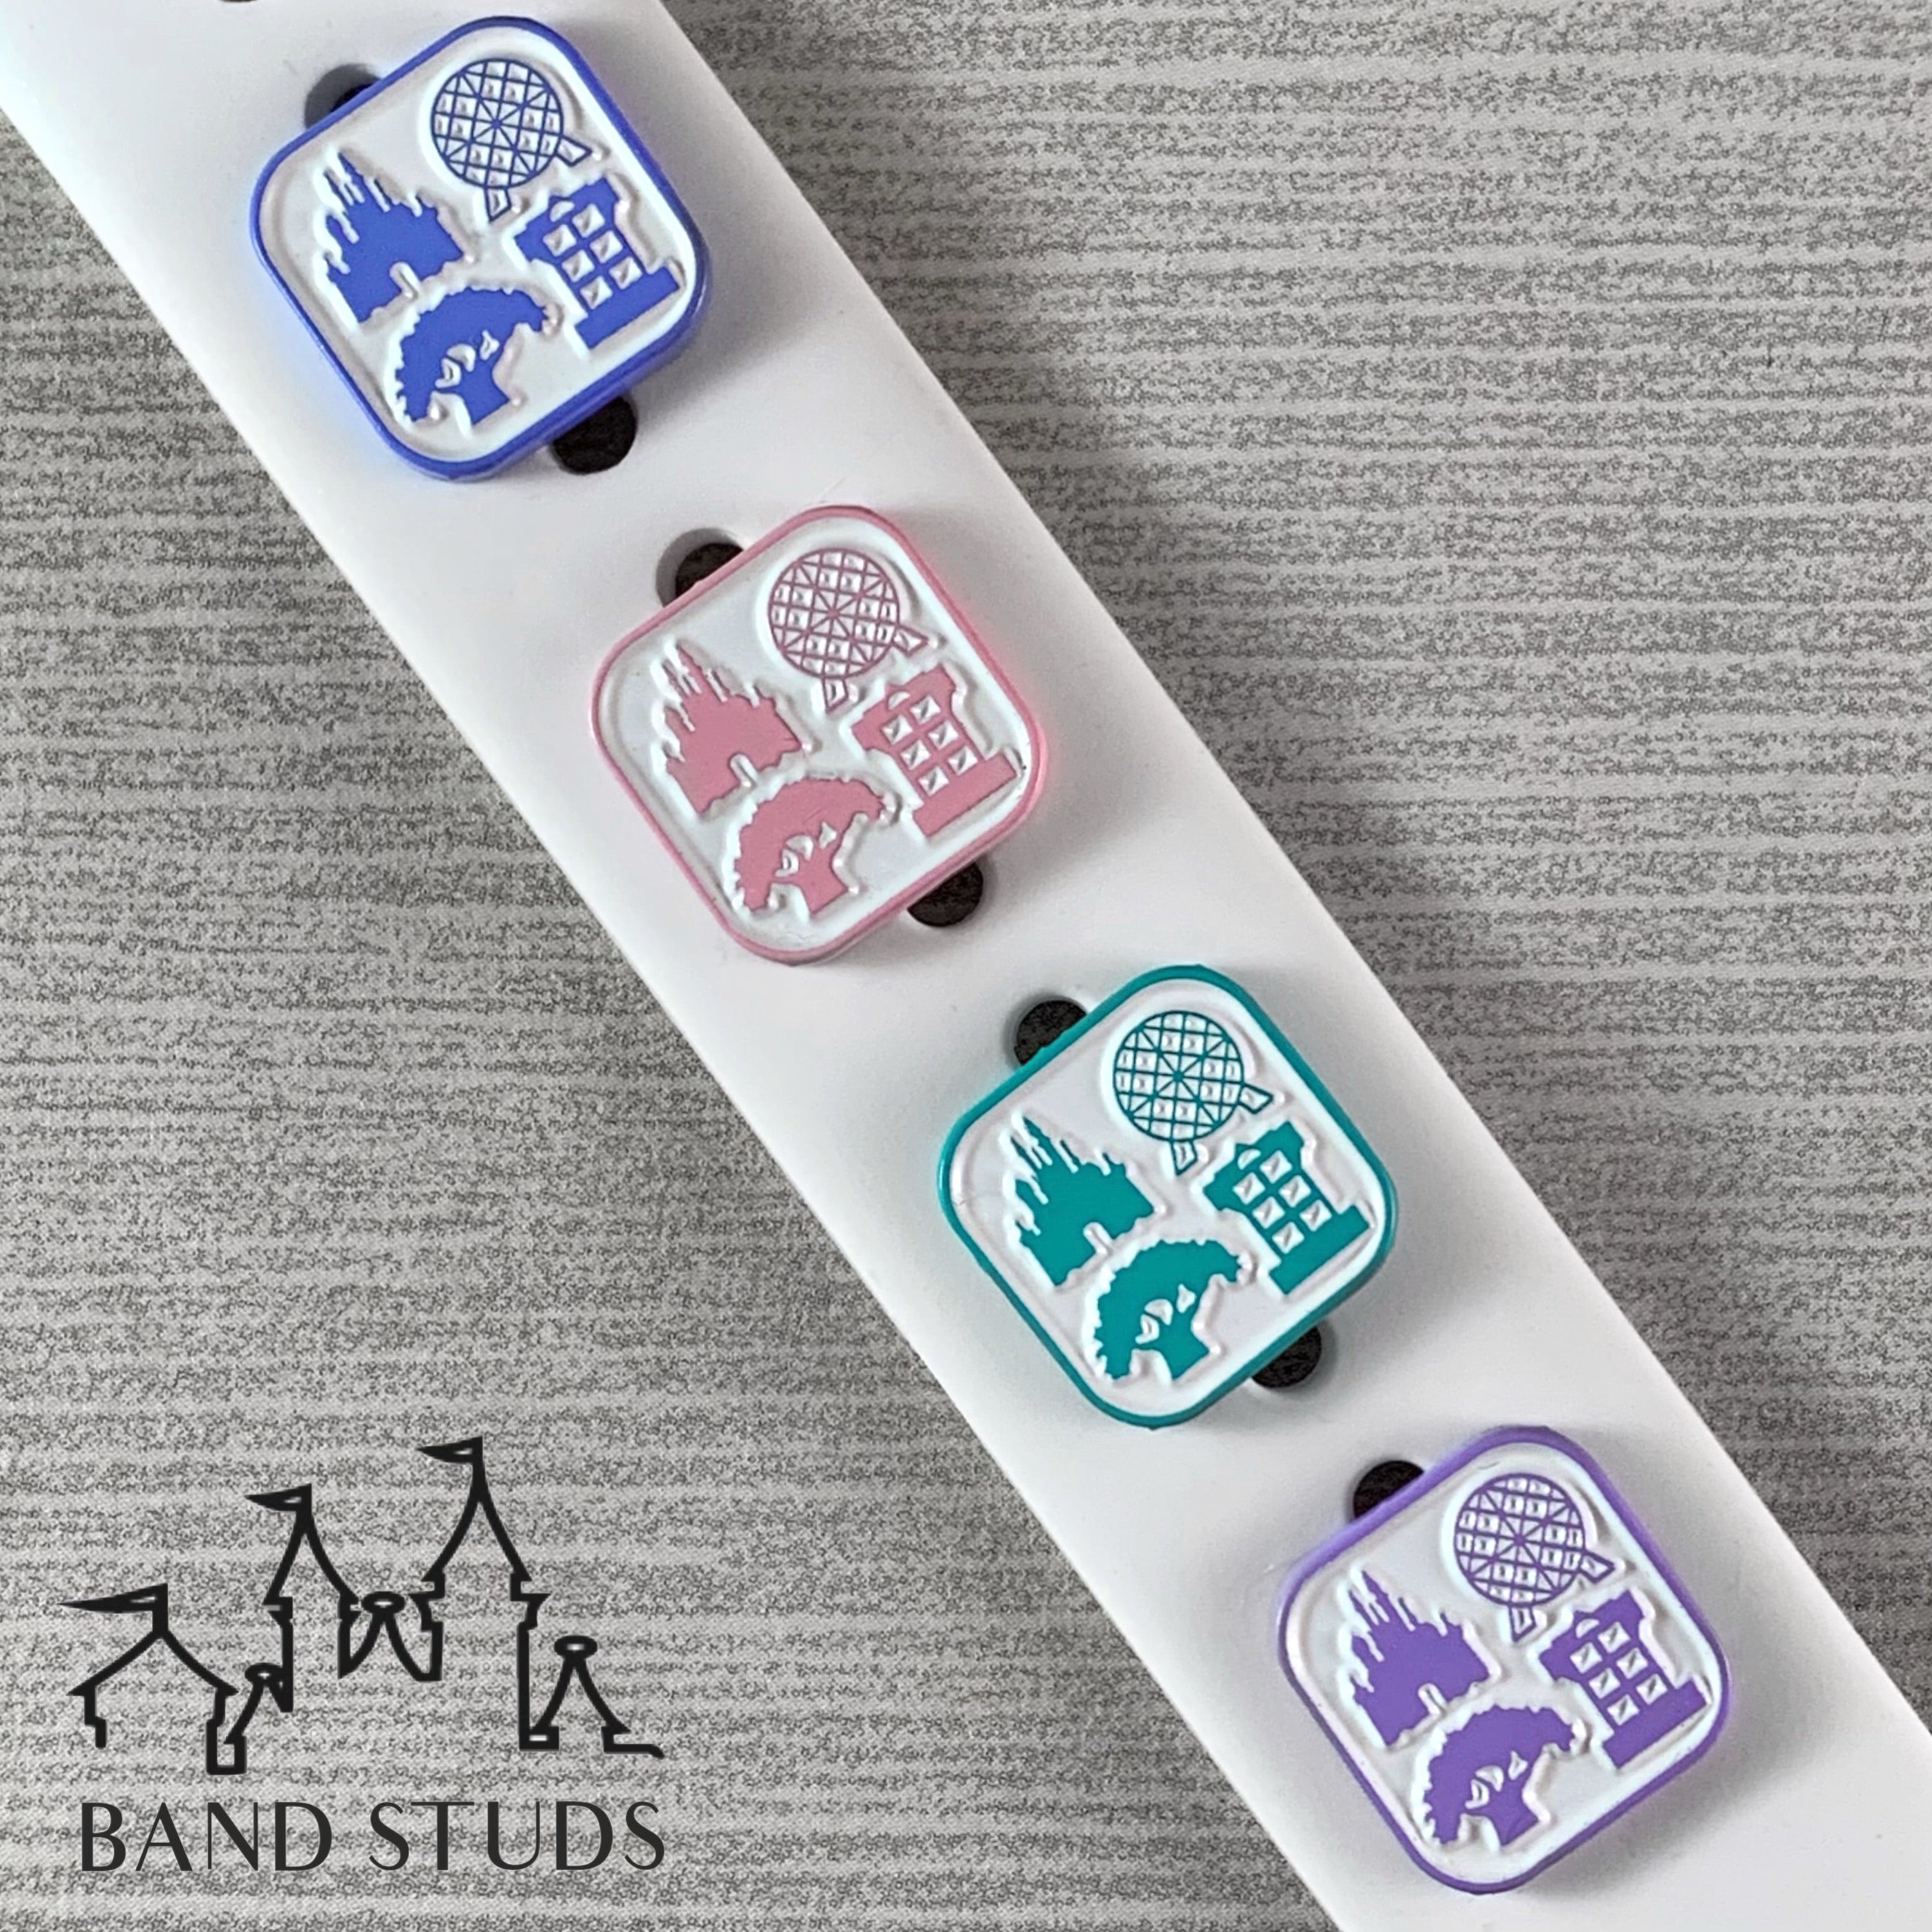 Band Stud® - Four Parks One World